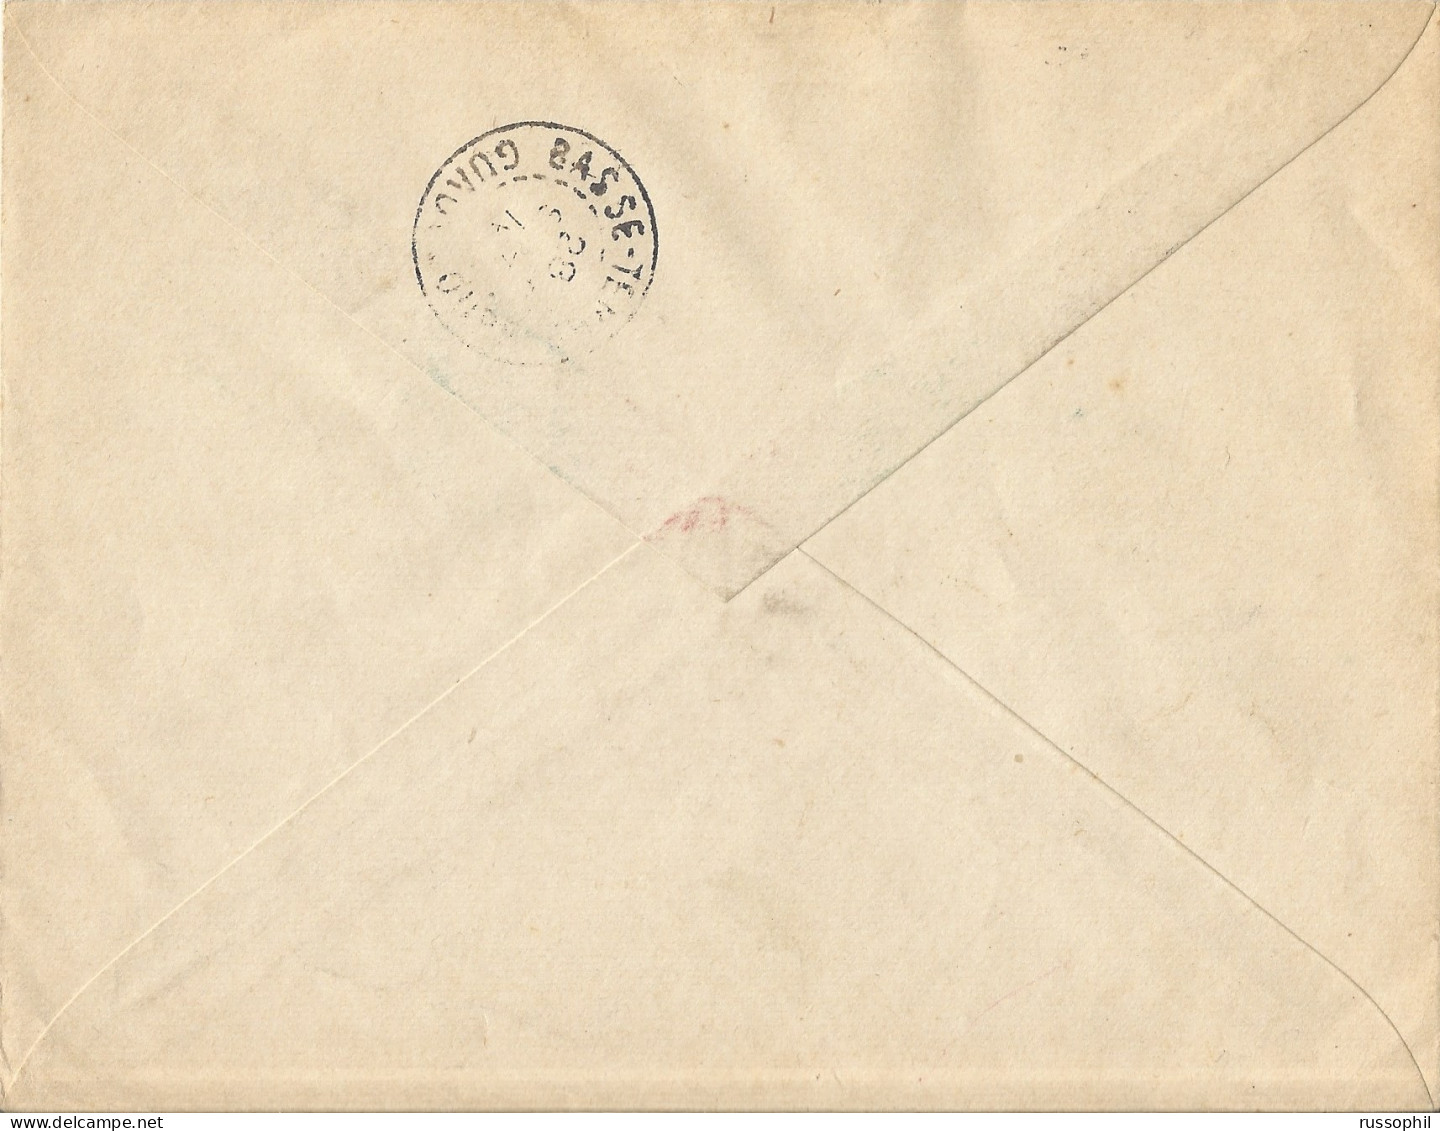 GUADELOUPE - FDC - 3 FR. 30 CENT. 5 STAMP FRANKING ON COVER FROM POINTE A PITRE TO BASSE TERRE - 27 SEPT 1943 - Lettres & Documents